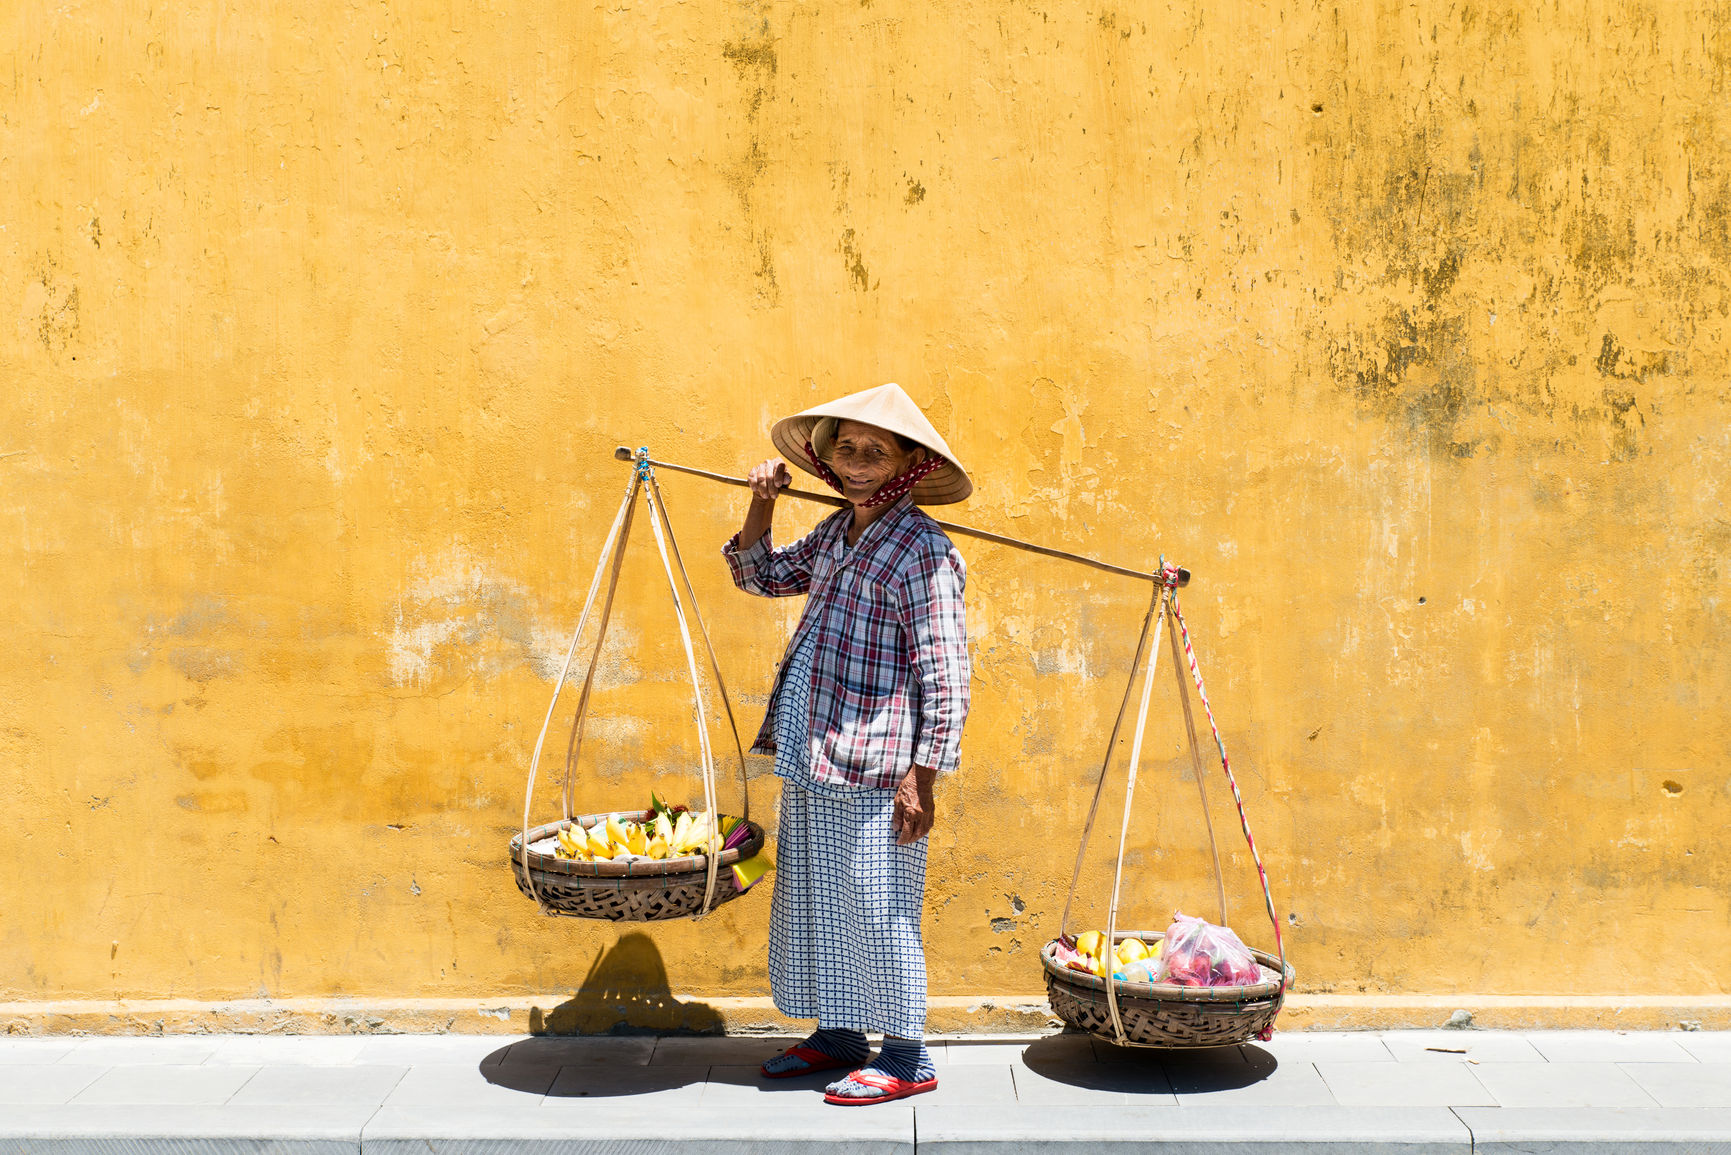 Side view of old woman in traditional Vietnamese hat carrying baskets full of bananas along sidewalk against grunge dirty yellow wall.